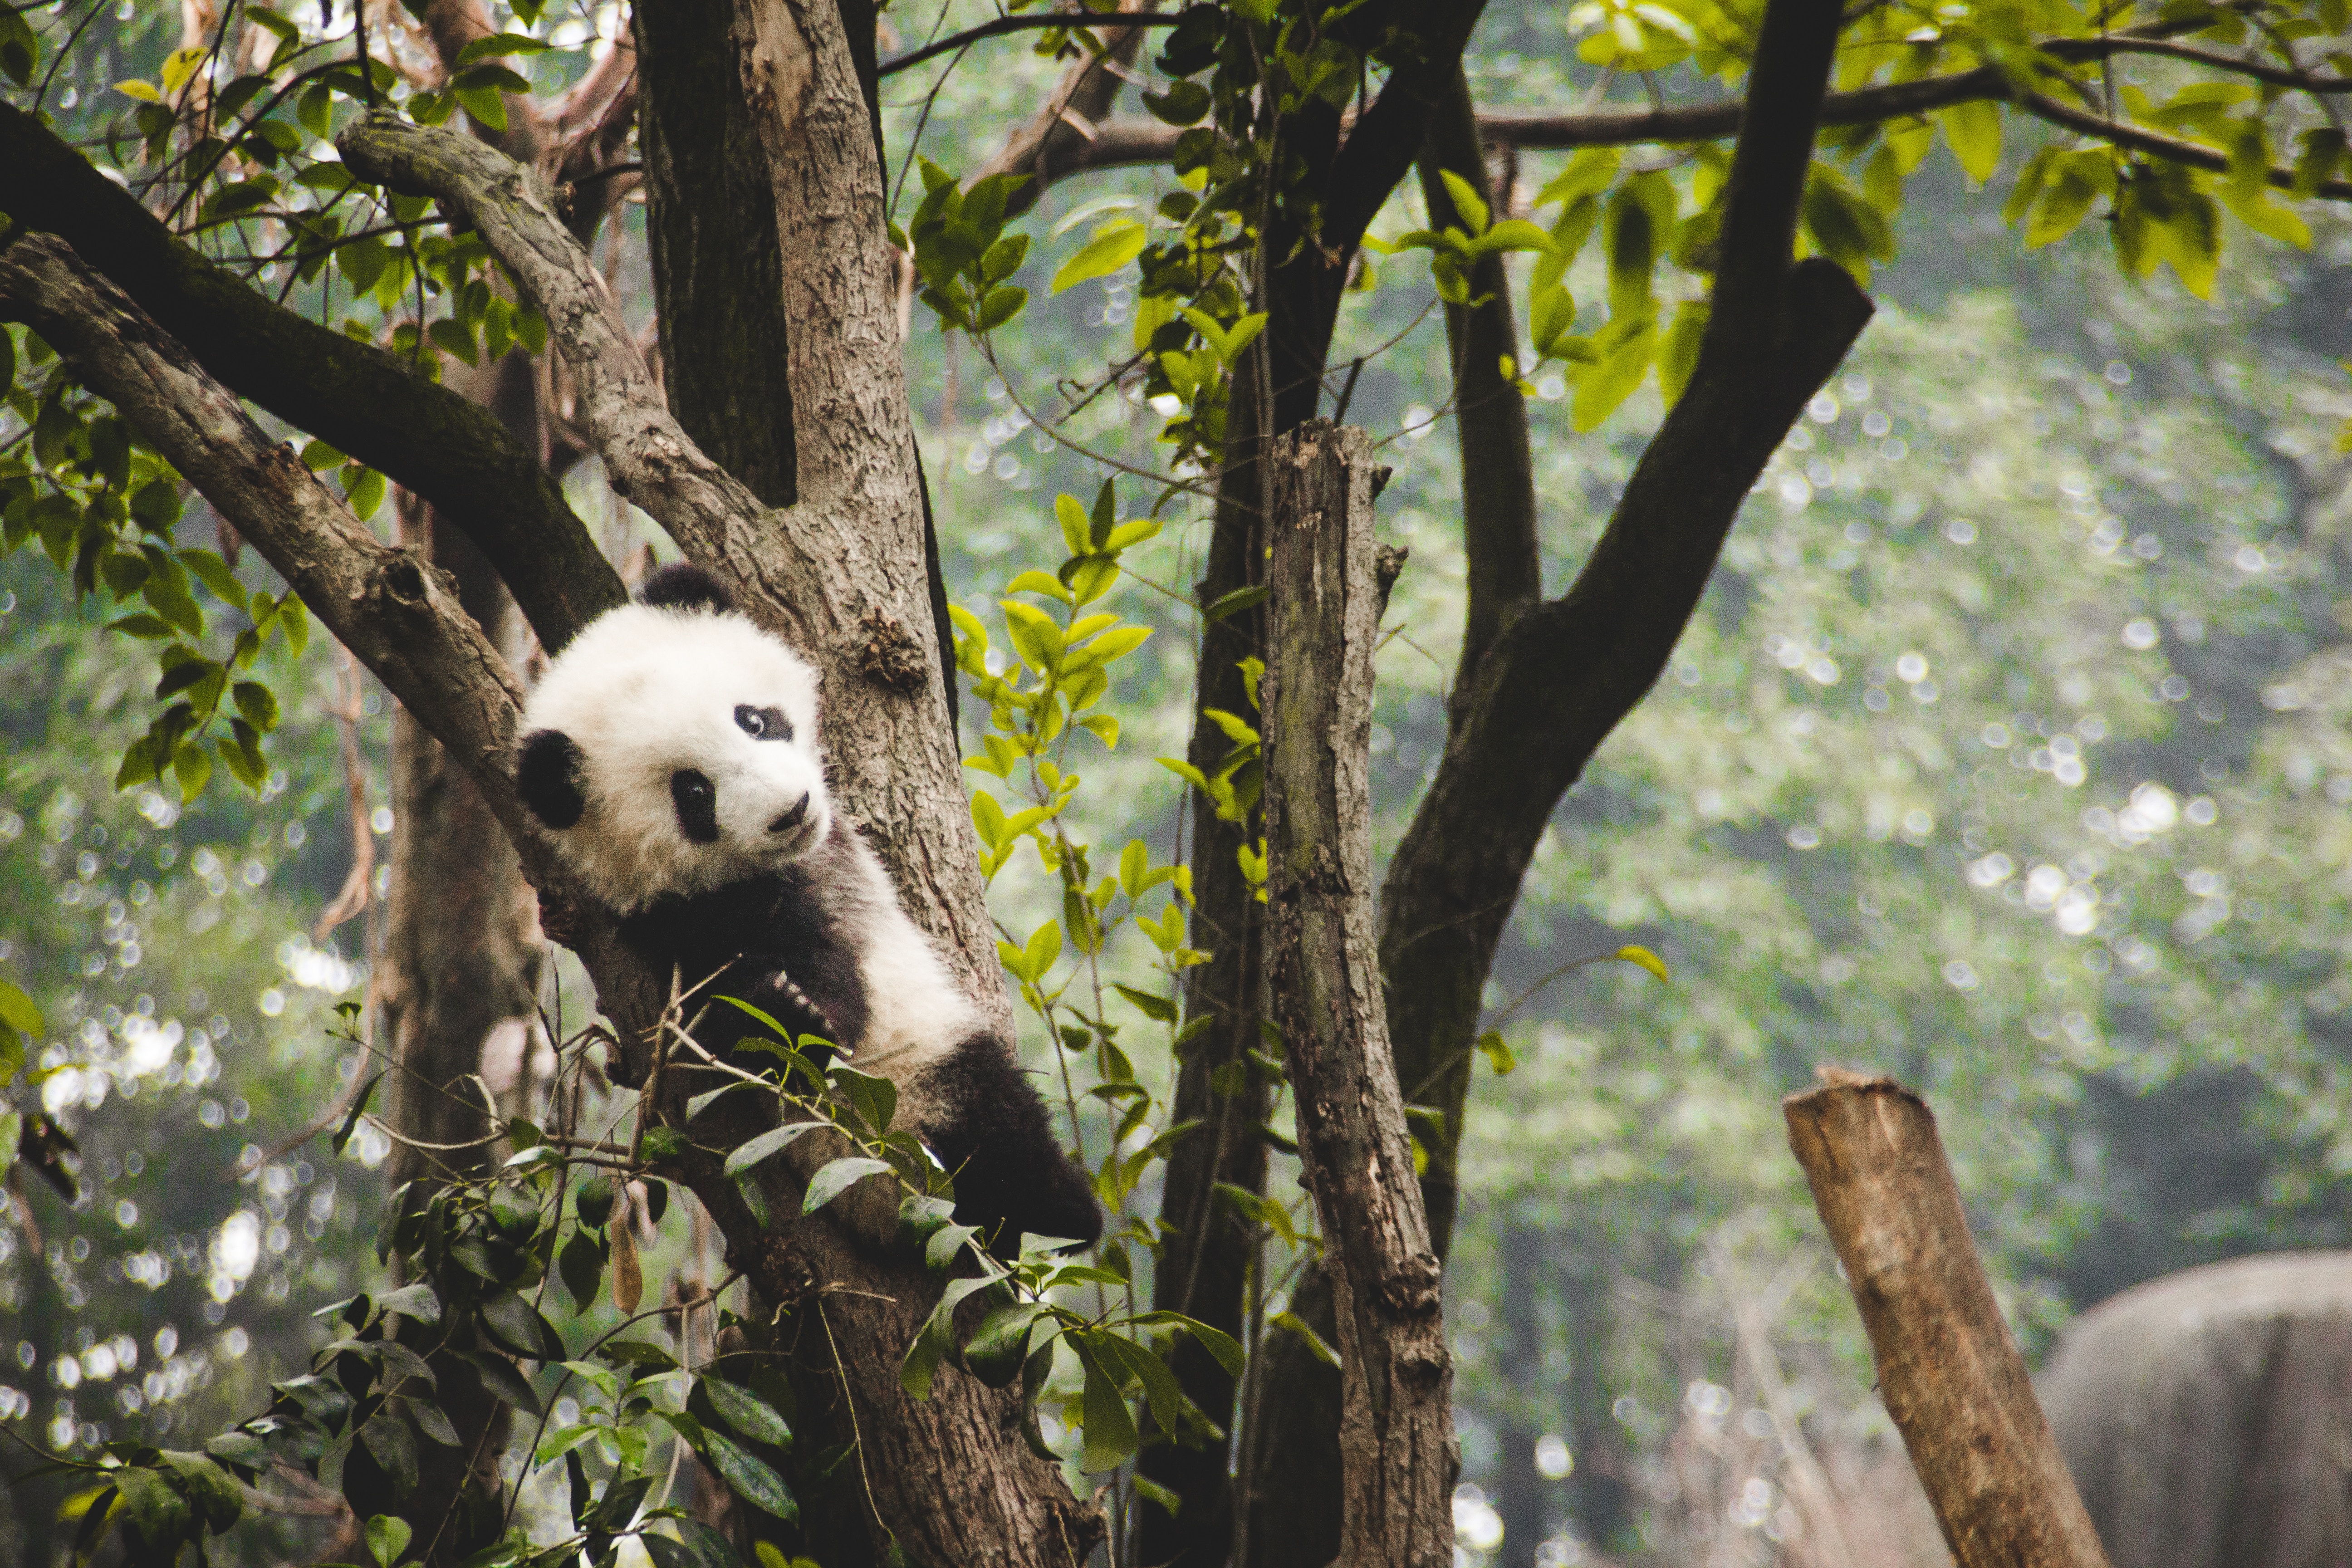 Giant pandas are no longer on the endangered species list